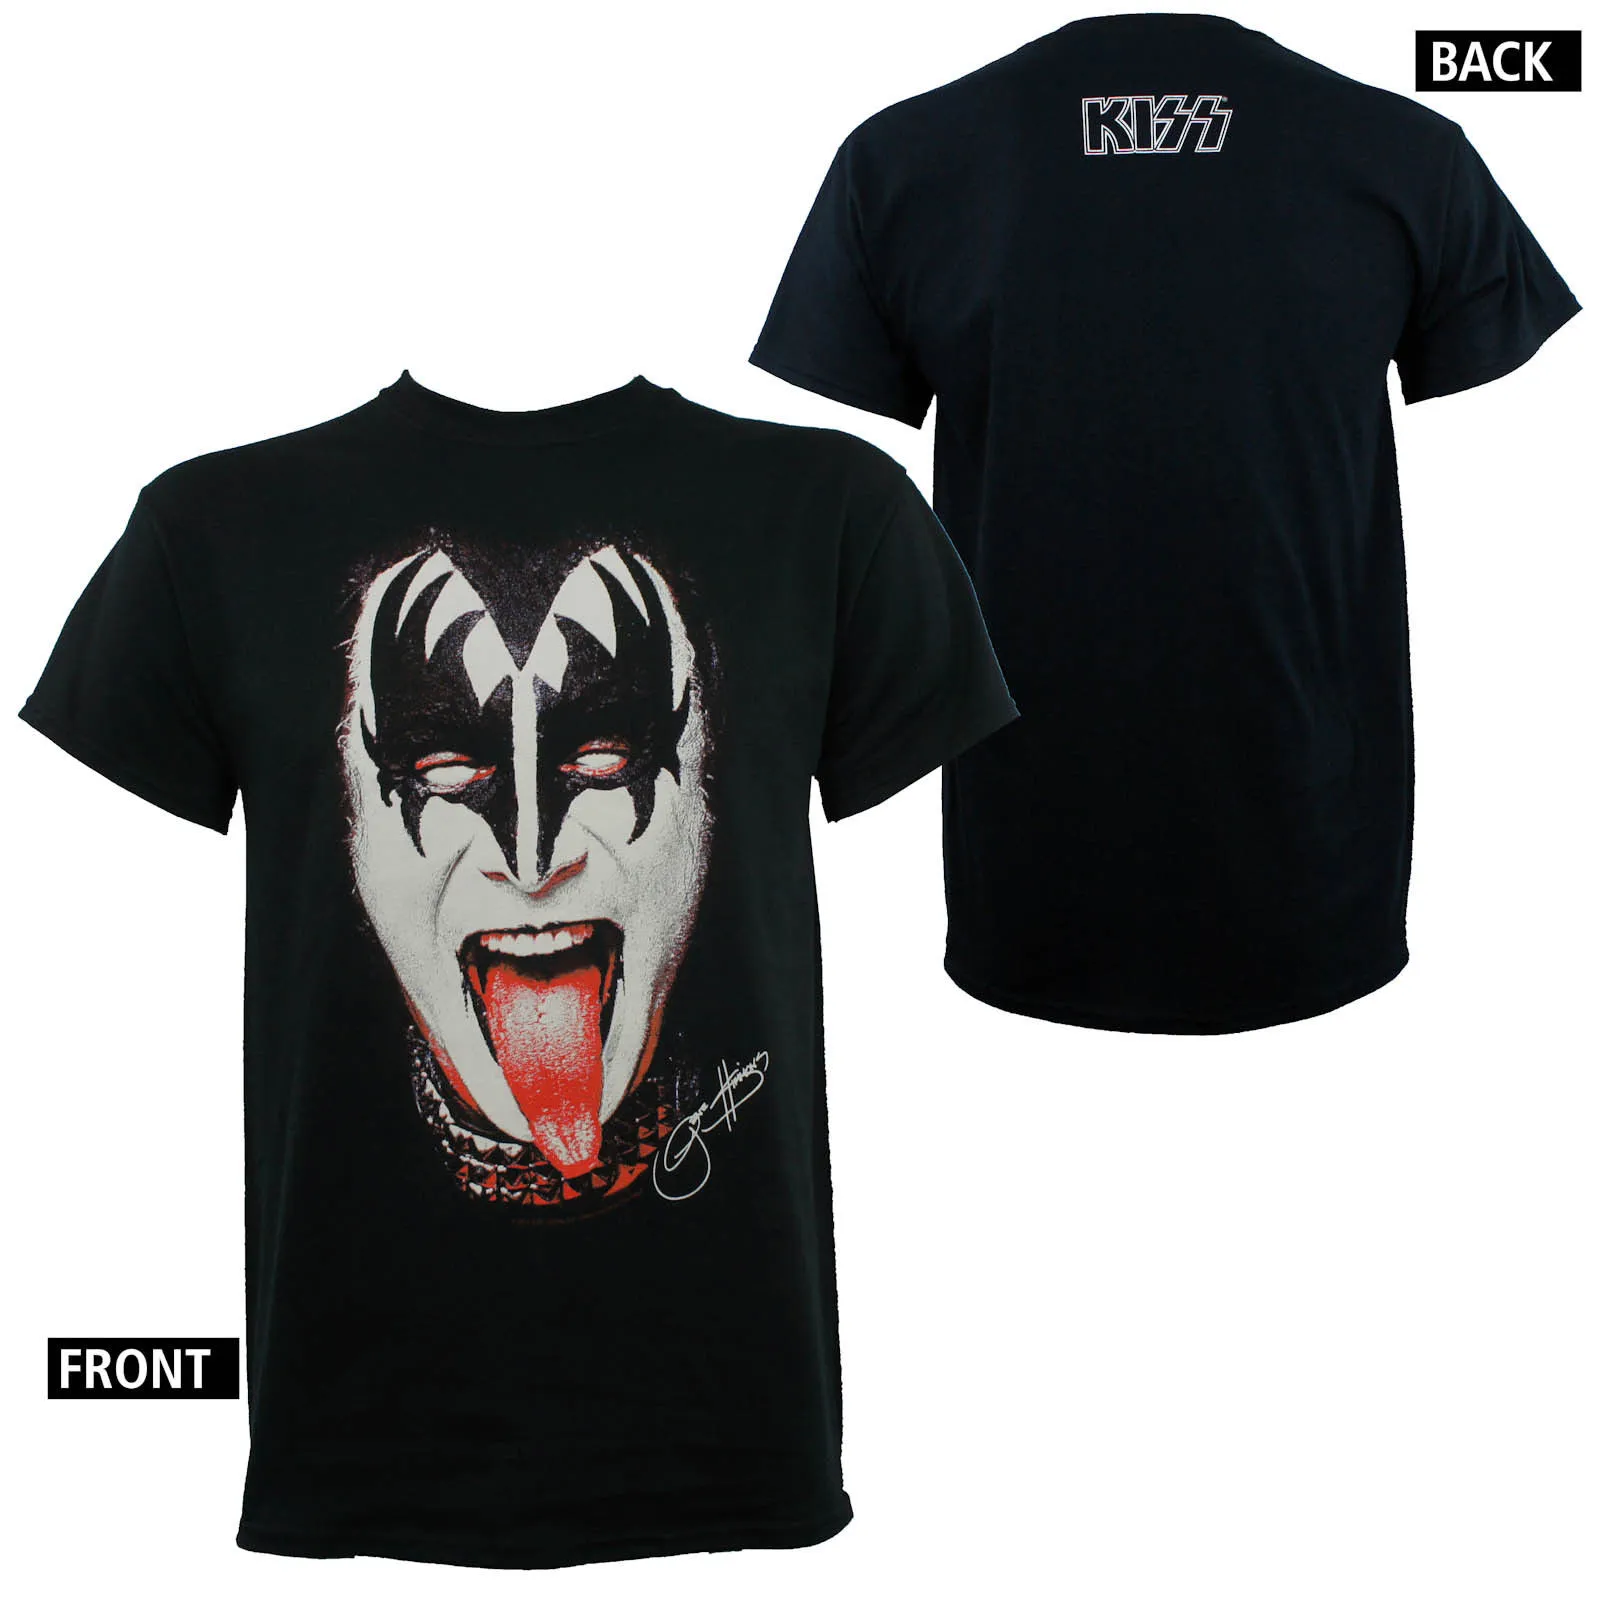 Authentic Kiss Band Demon Gene Simmons With Make Up T Shirt S M L Xl 2xl New From Sevenshopping